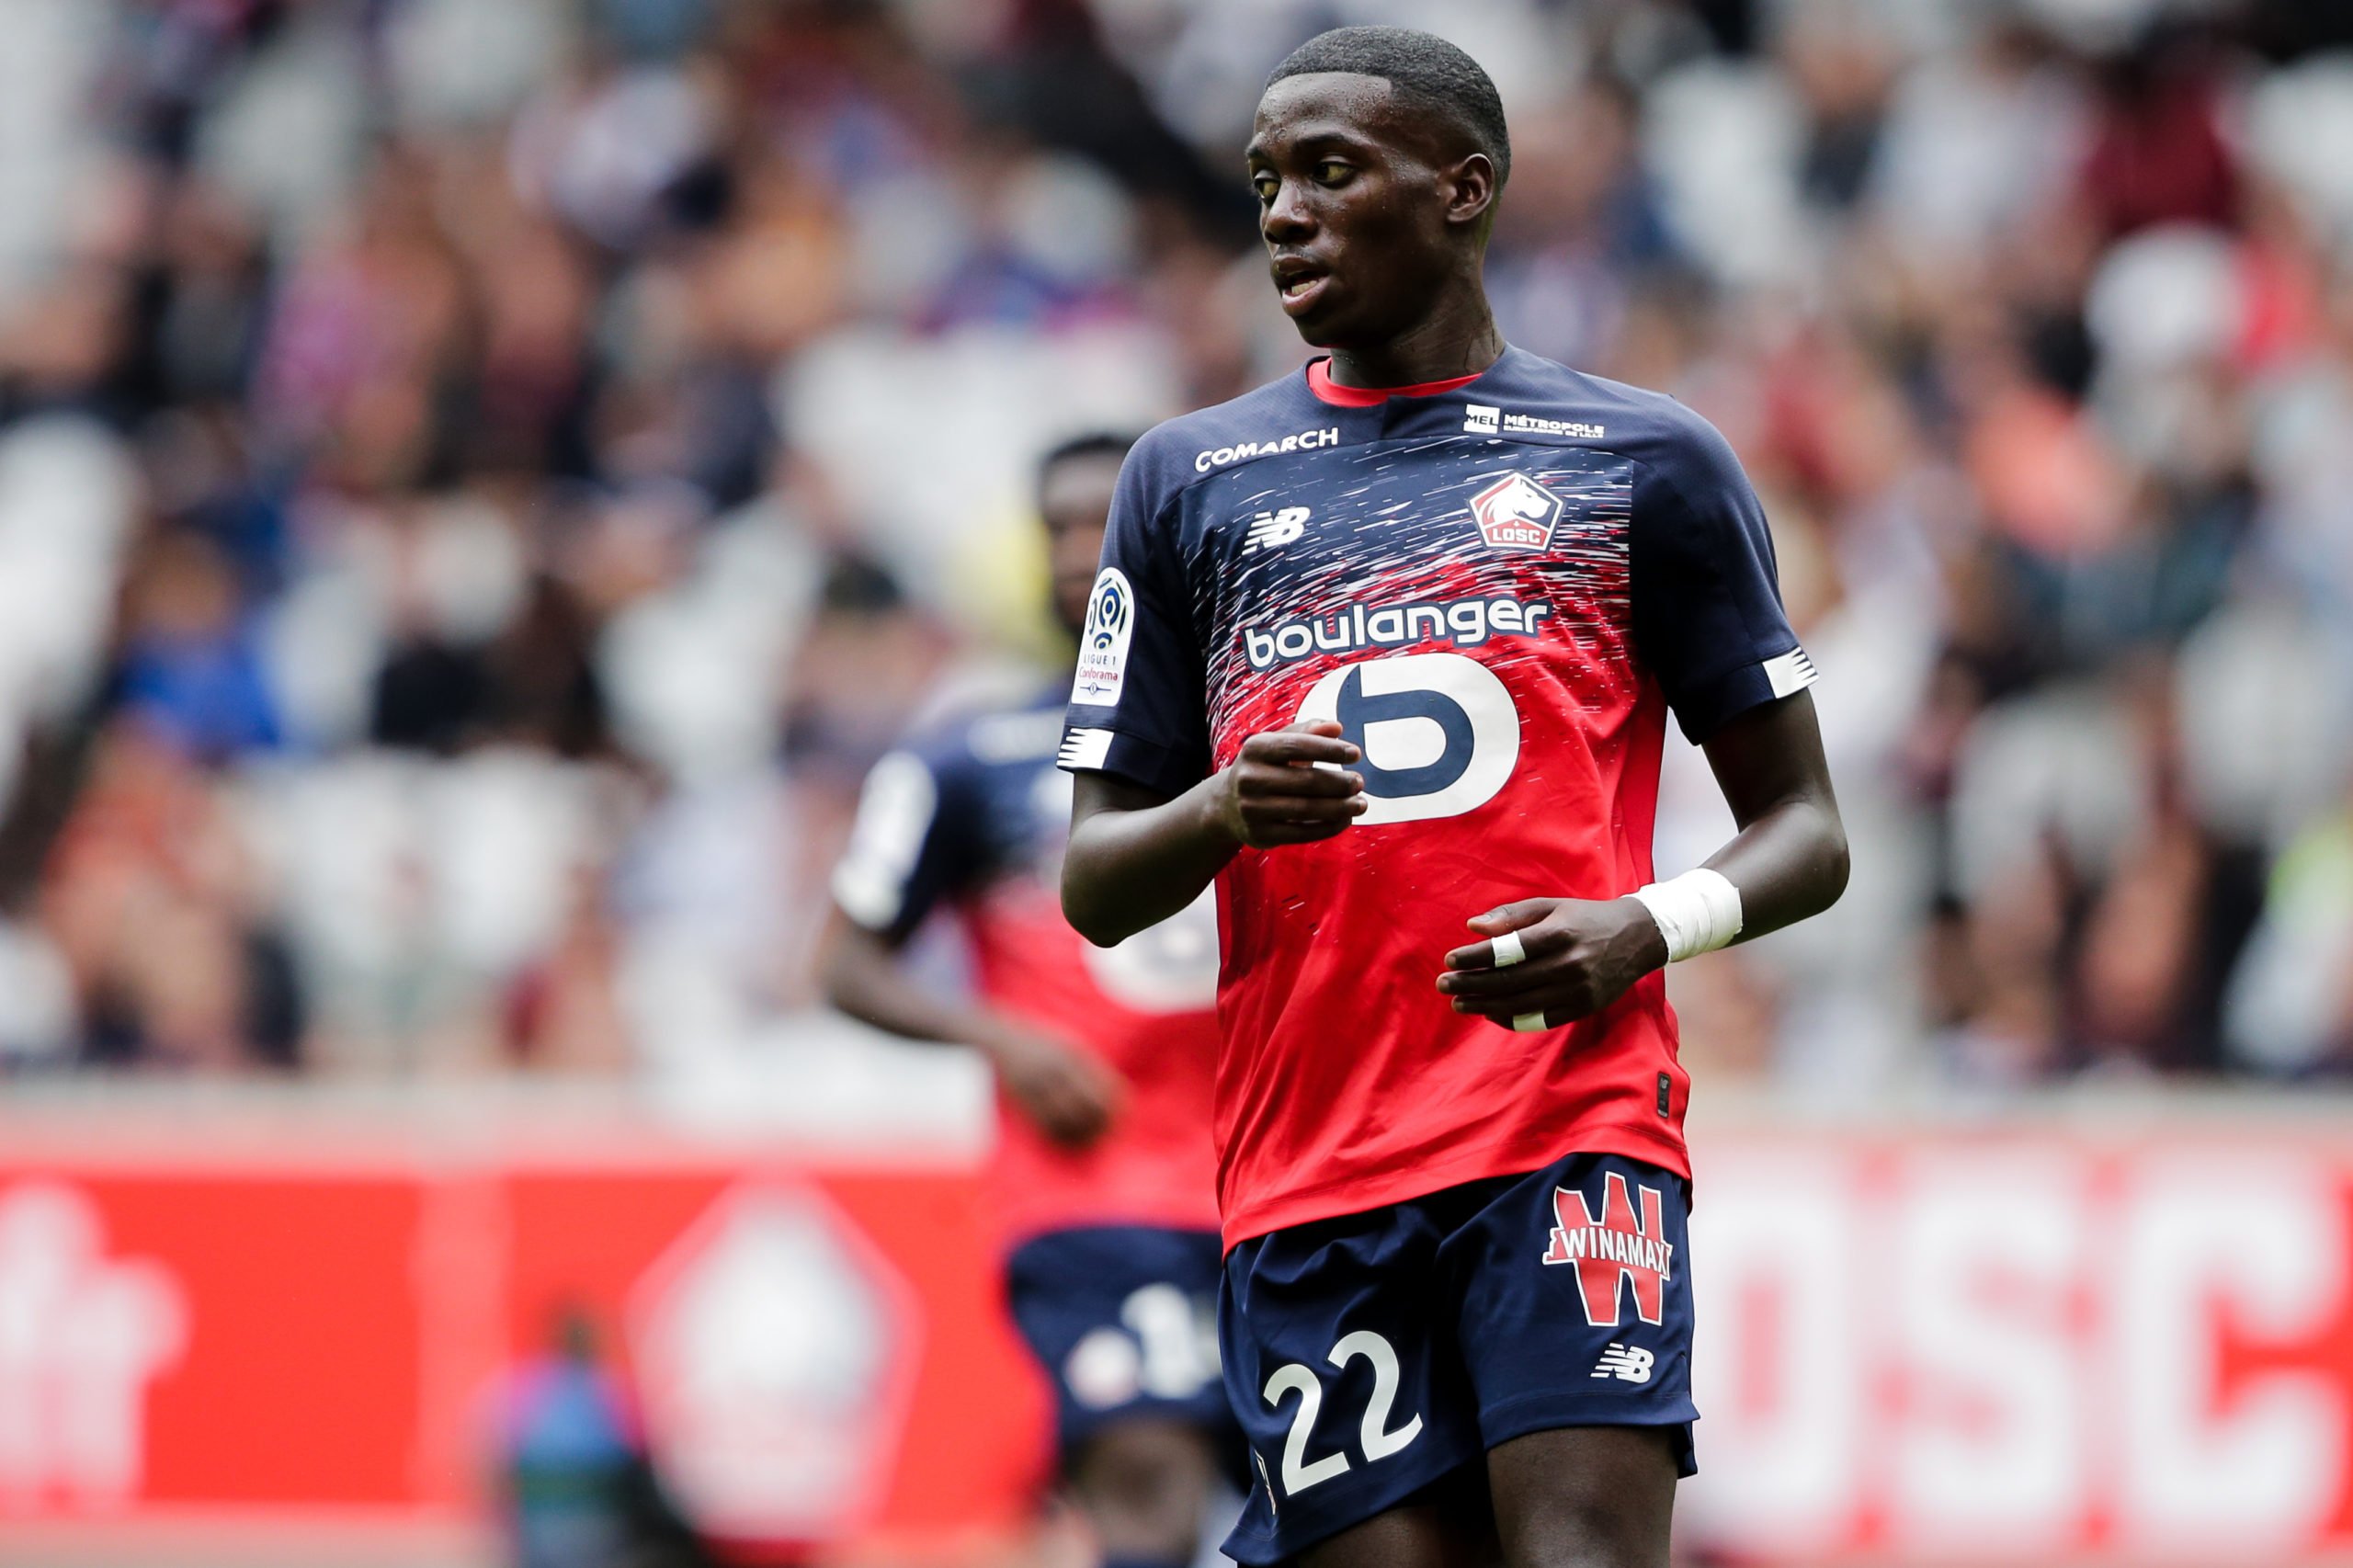 Weah is struggling at Lille